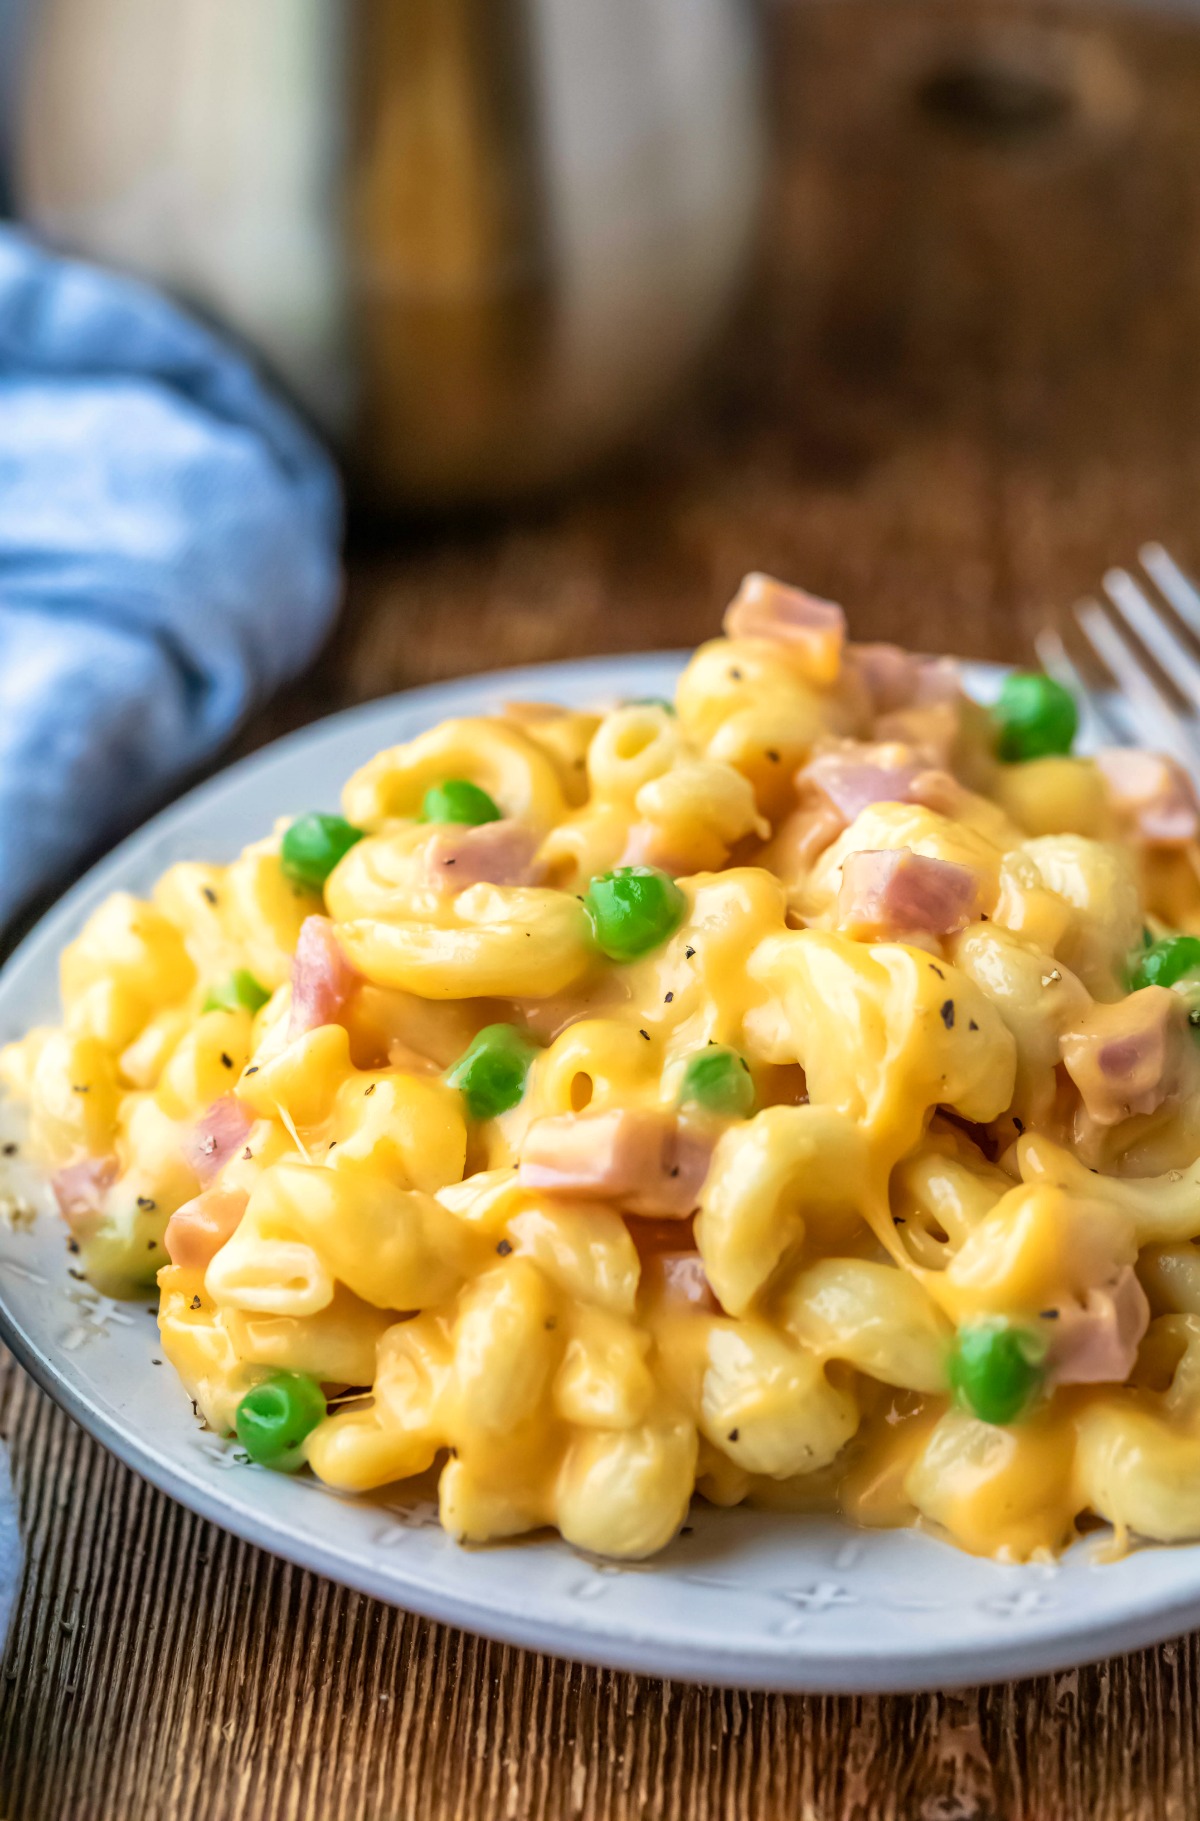 Plate of macaroni and cheese with ham and peas next to a blue linen napkin